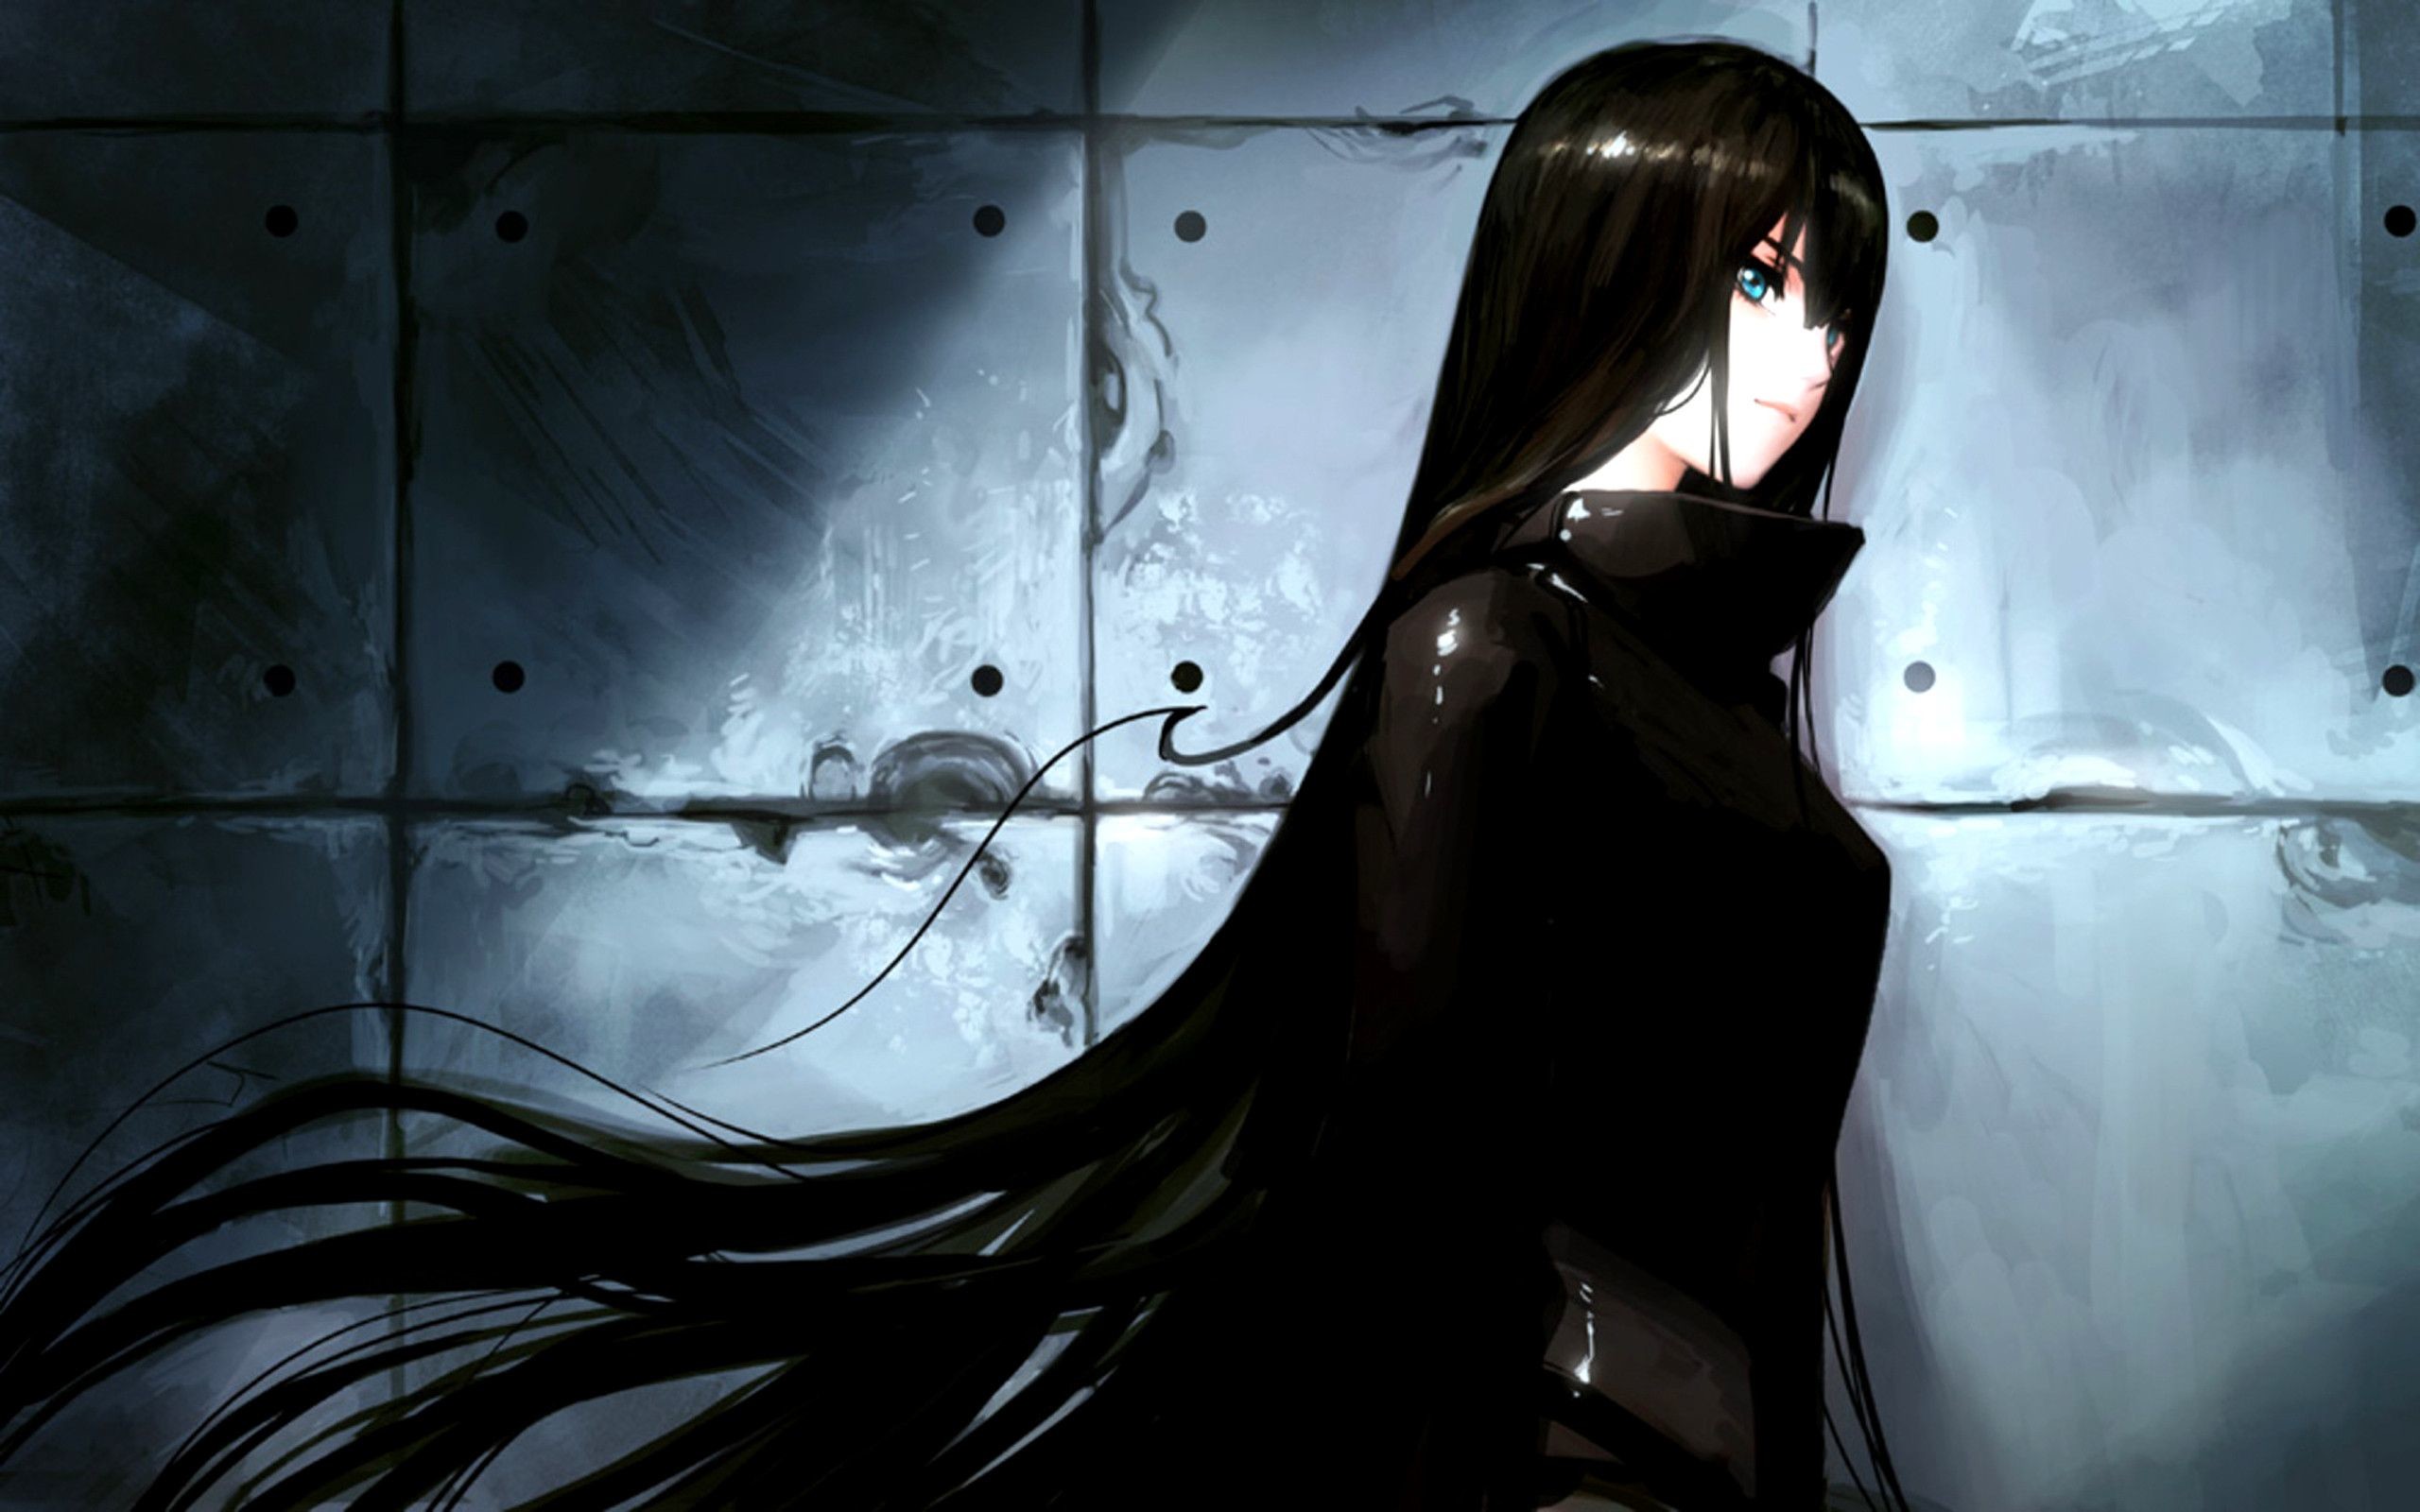 2560x1600 gothic anime wallpaper hd cool images download amazing colourful samsung  phone wallpapers 1080p display digital photos 2560Ã1600 Wallpaper HD